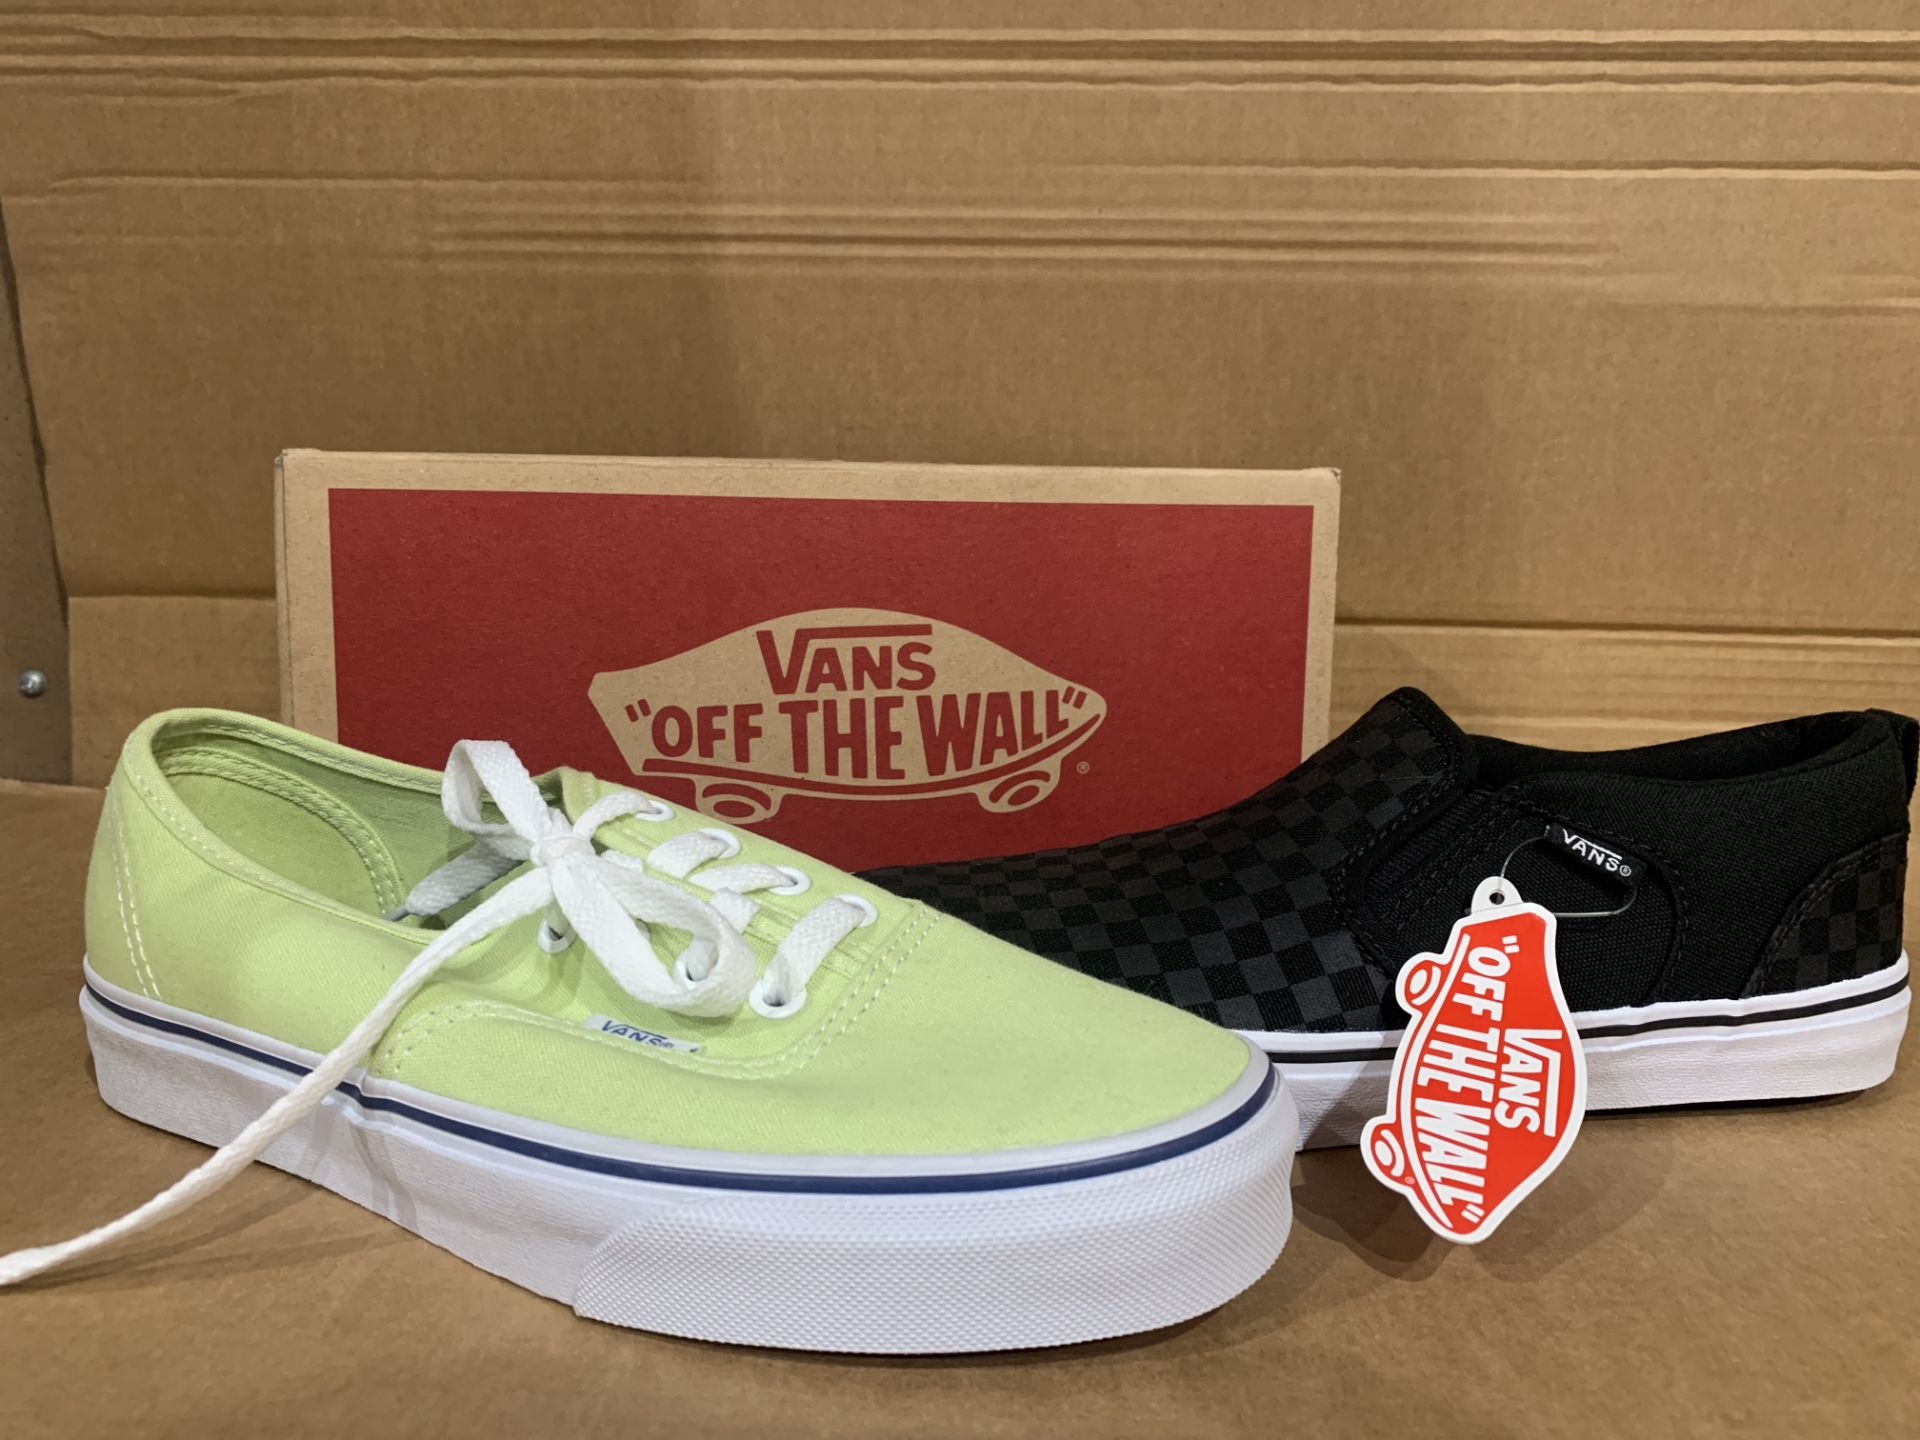 4 X BRAND NEW VANS SHADOW LIME TRUE WHITE TRAINERS SIZE 4.5